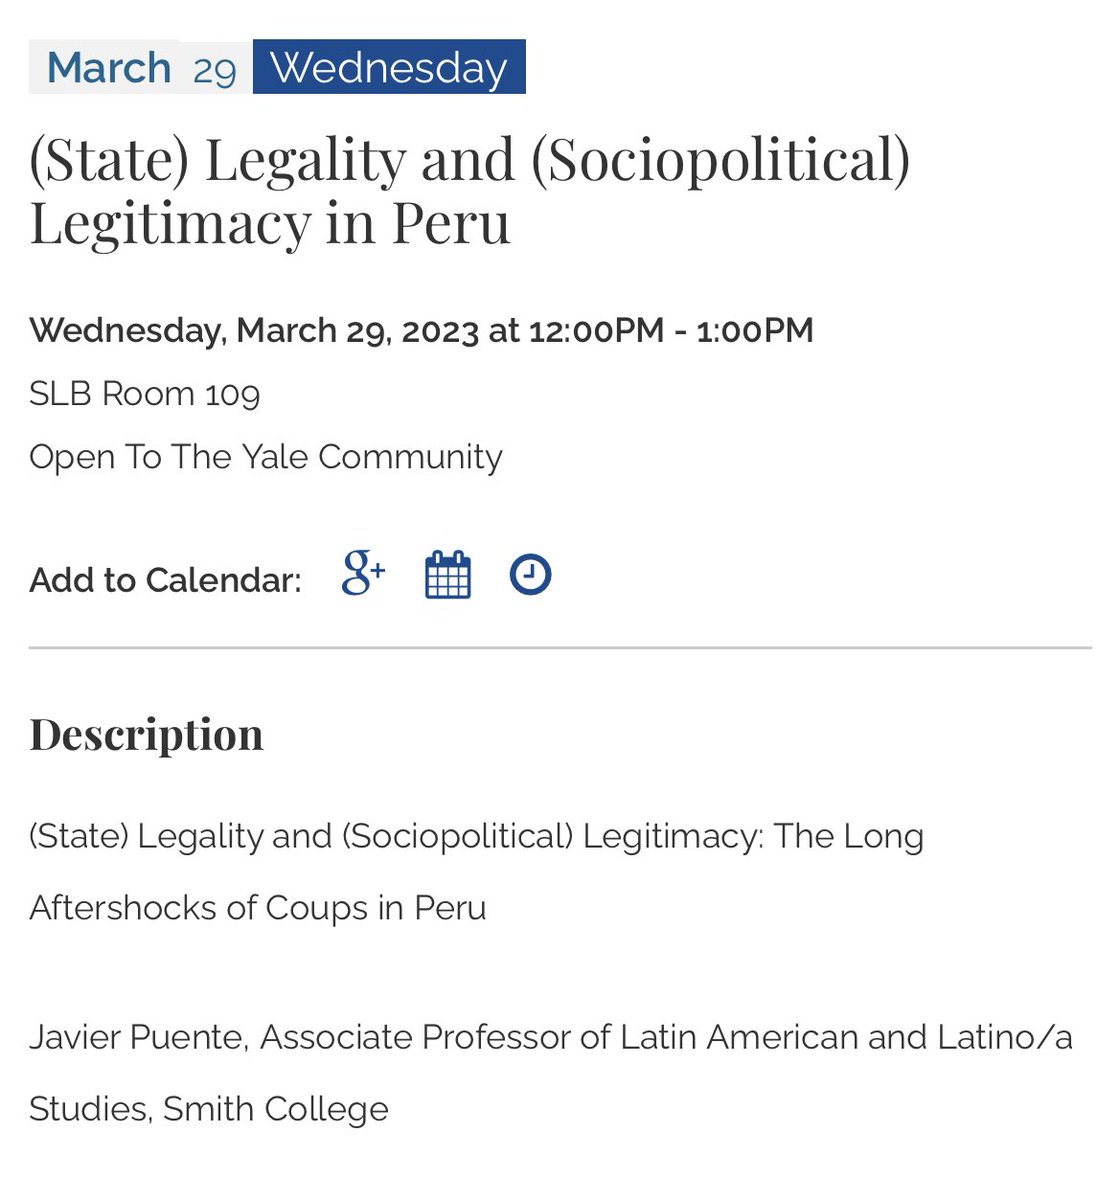 If you are around New Haven this Wednesday, come join us at @YaleLawSch for a conversation on Peru’s short history of institutional crises. https://t.co/hKu3gHxHBU